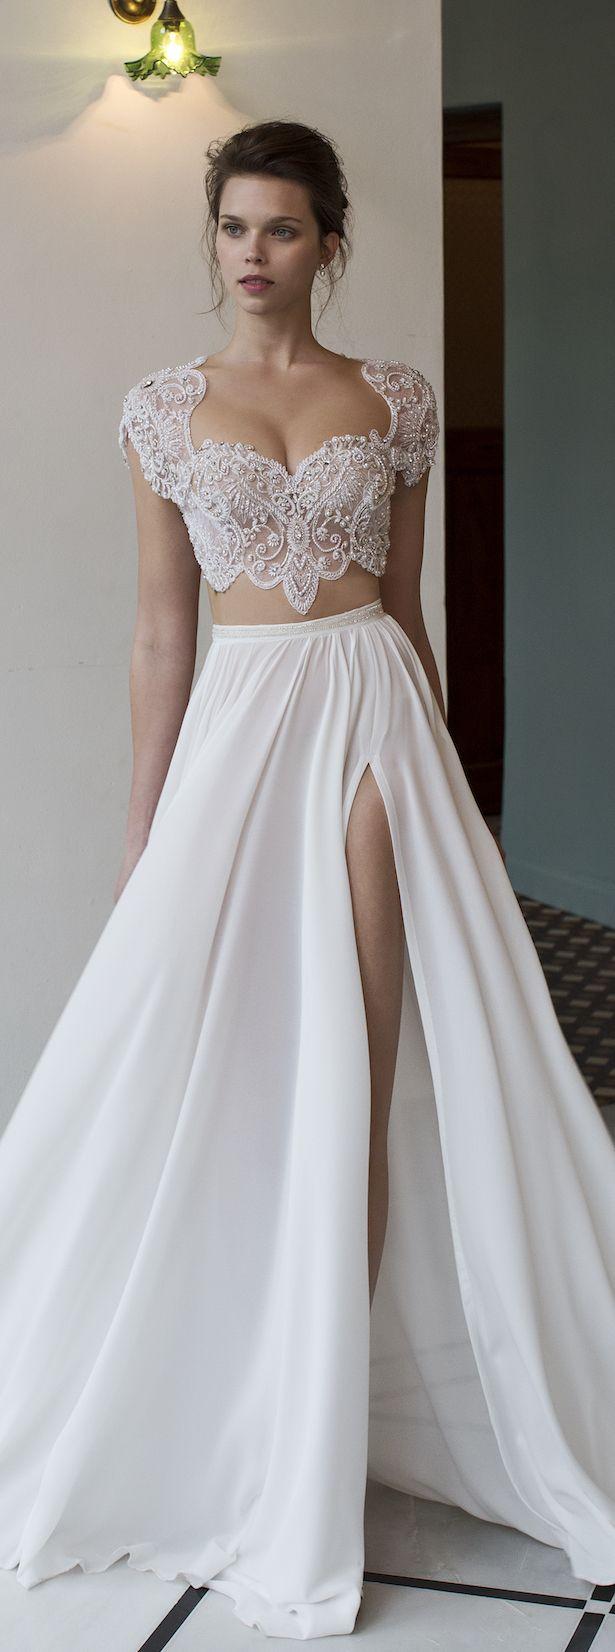 Mariage - Bridal Trends: Two- Piece Wedding Dresses